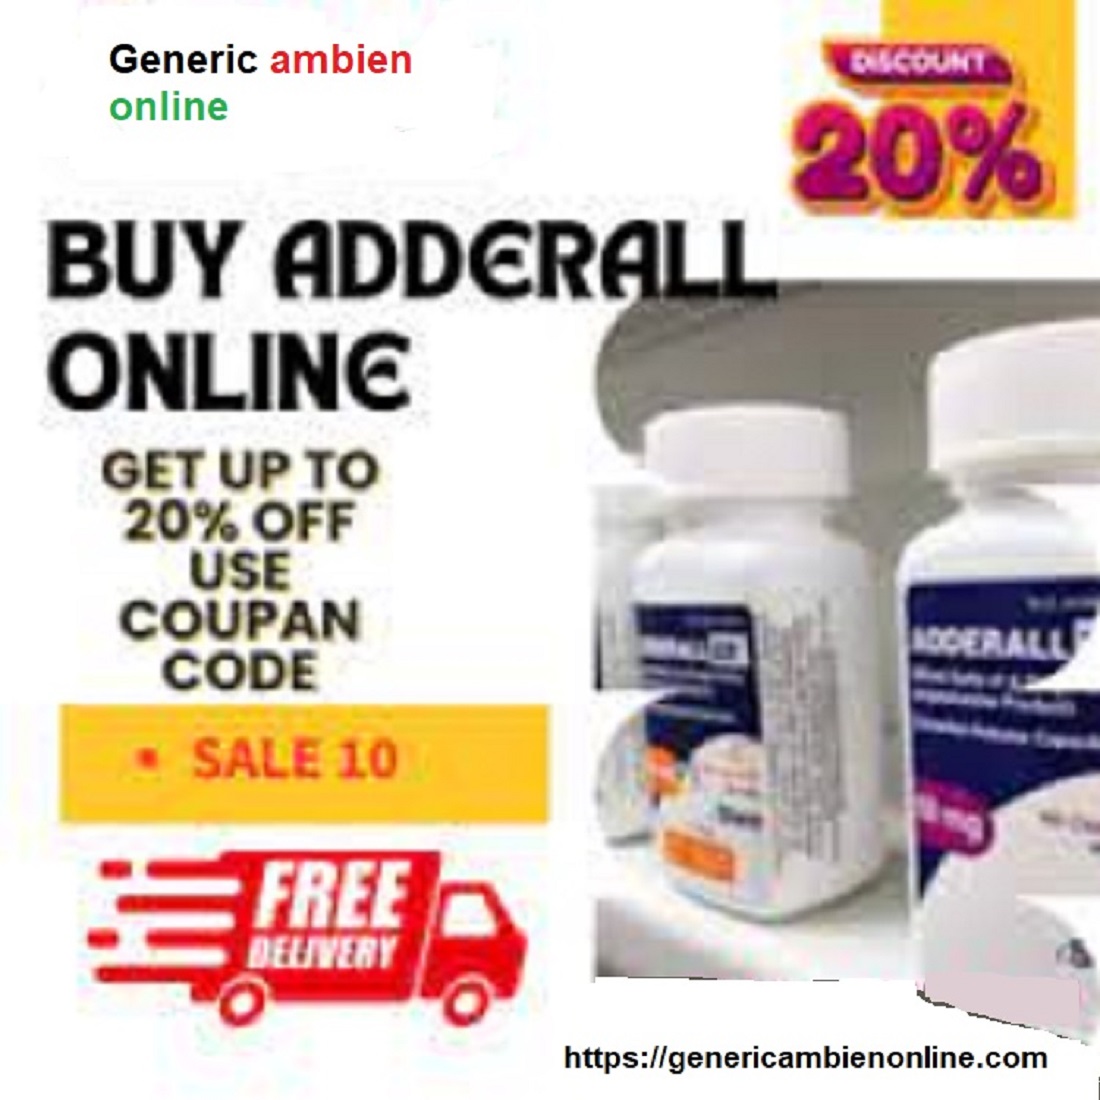 Buy Ambien Online Overnight Free Delivery